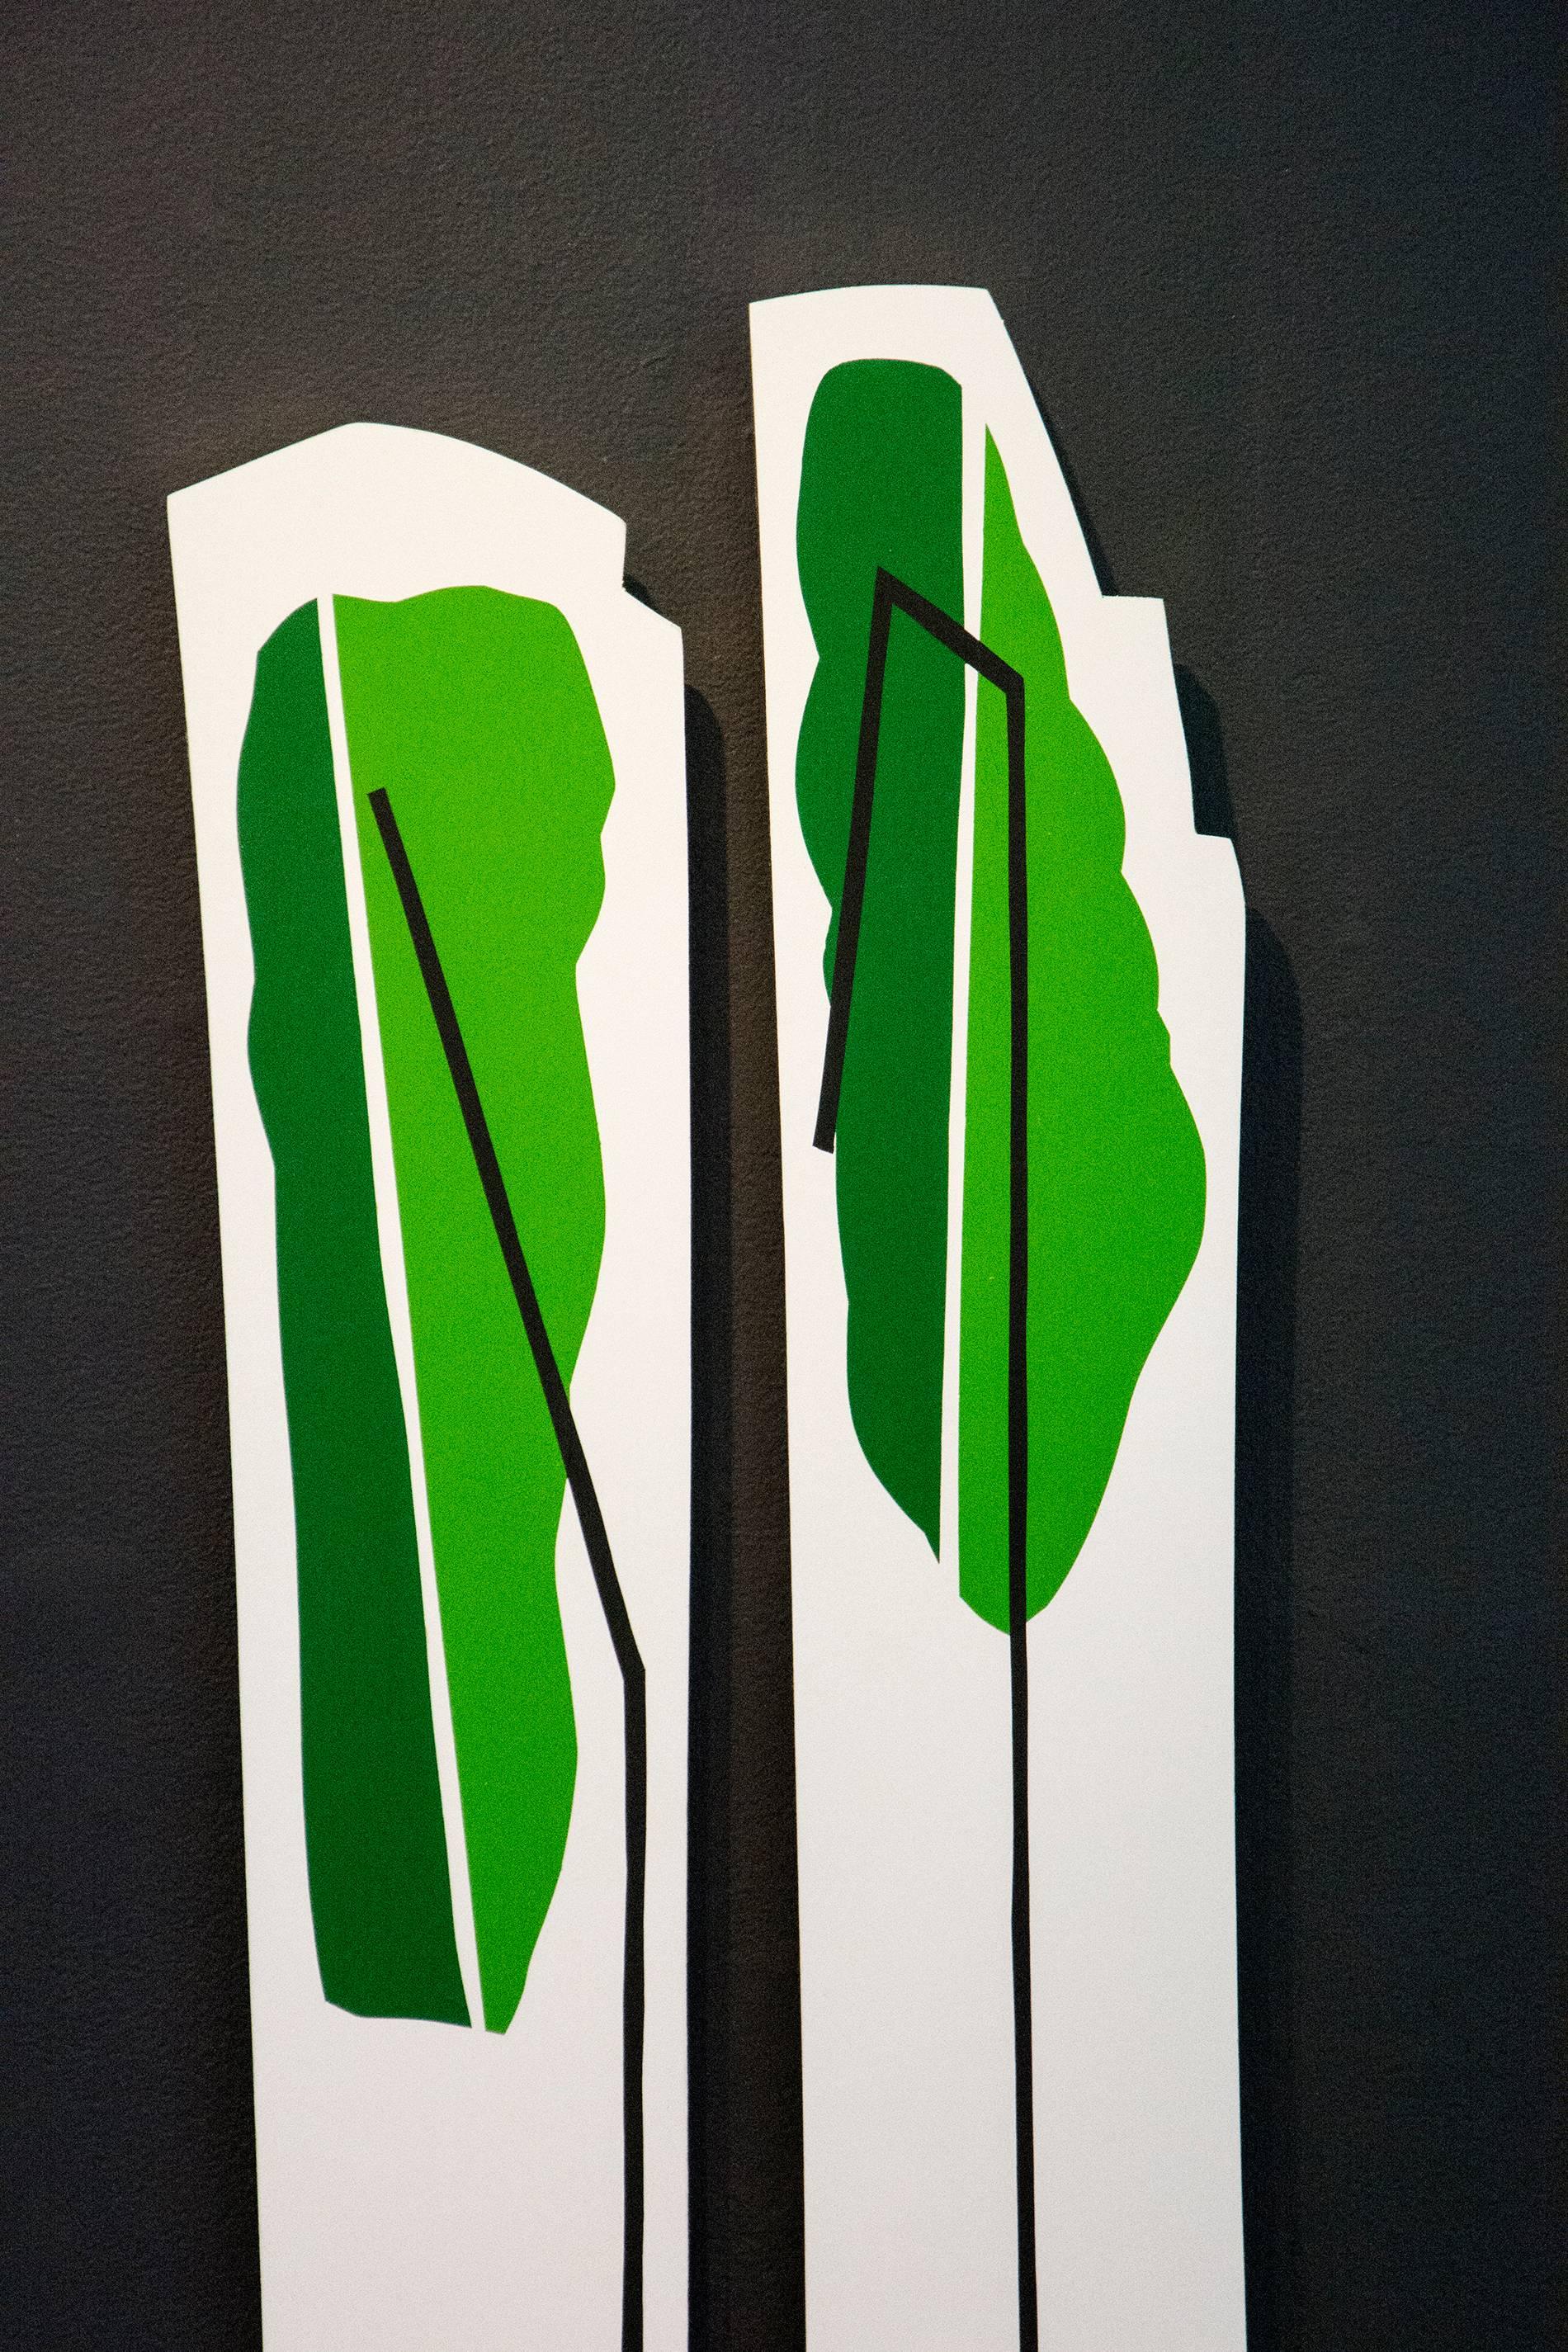 Tall Grass-Like Objects 1 & 2 - fun, gold leaf edge, acrylic on shaped panel - Gold Abstract Painting by Aron Hill